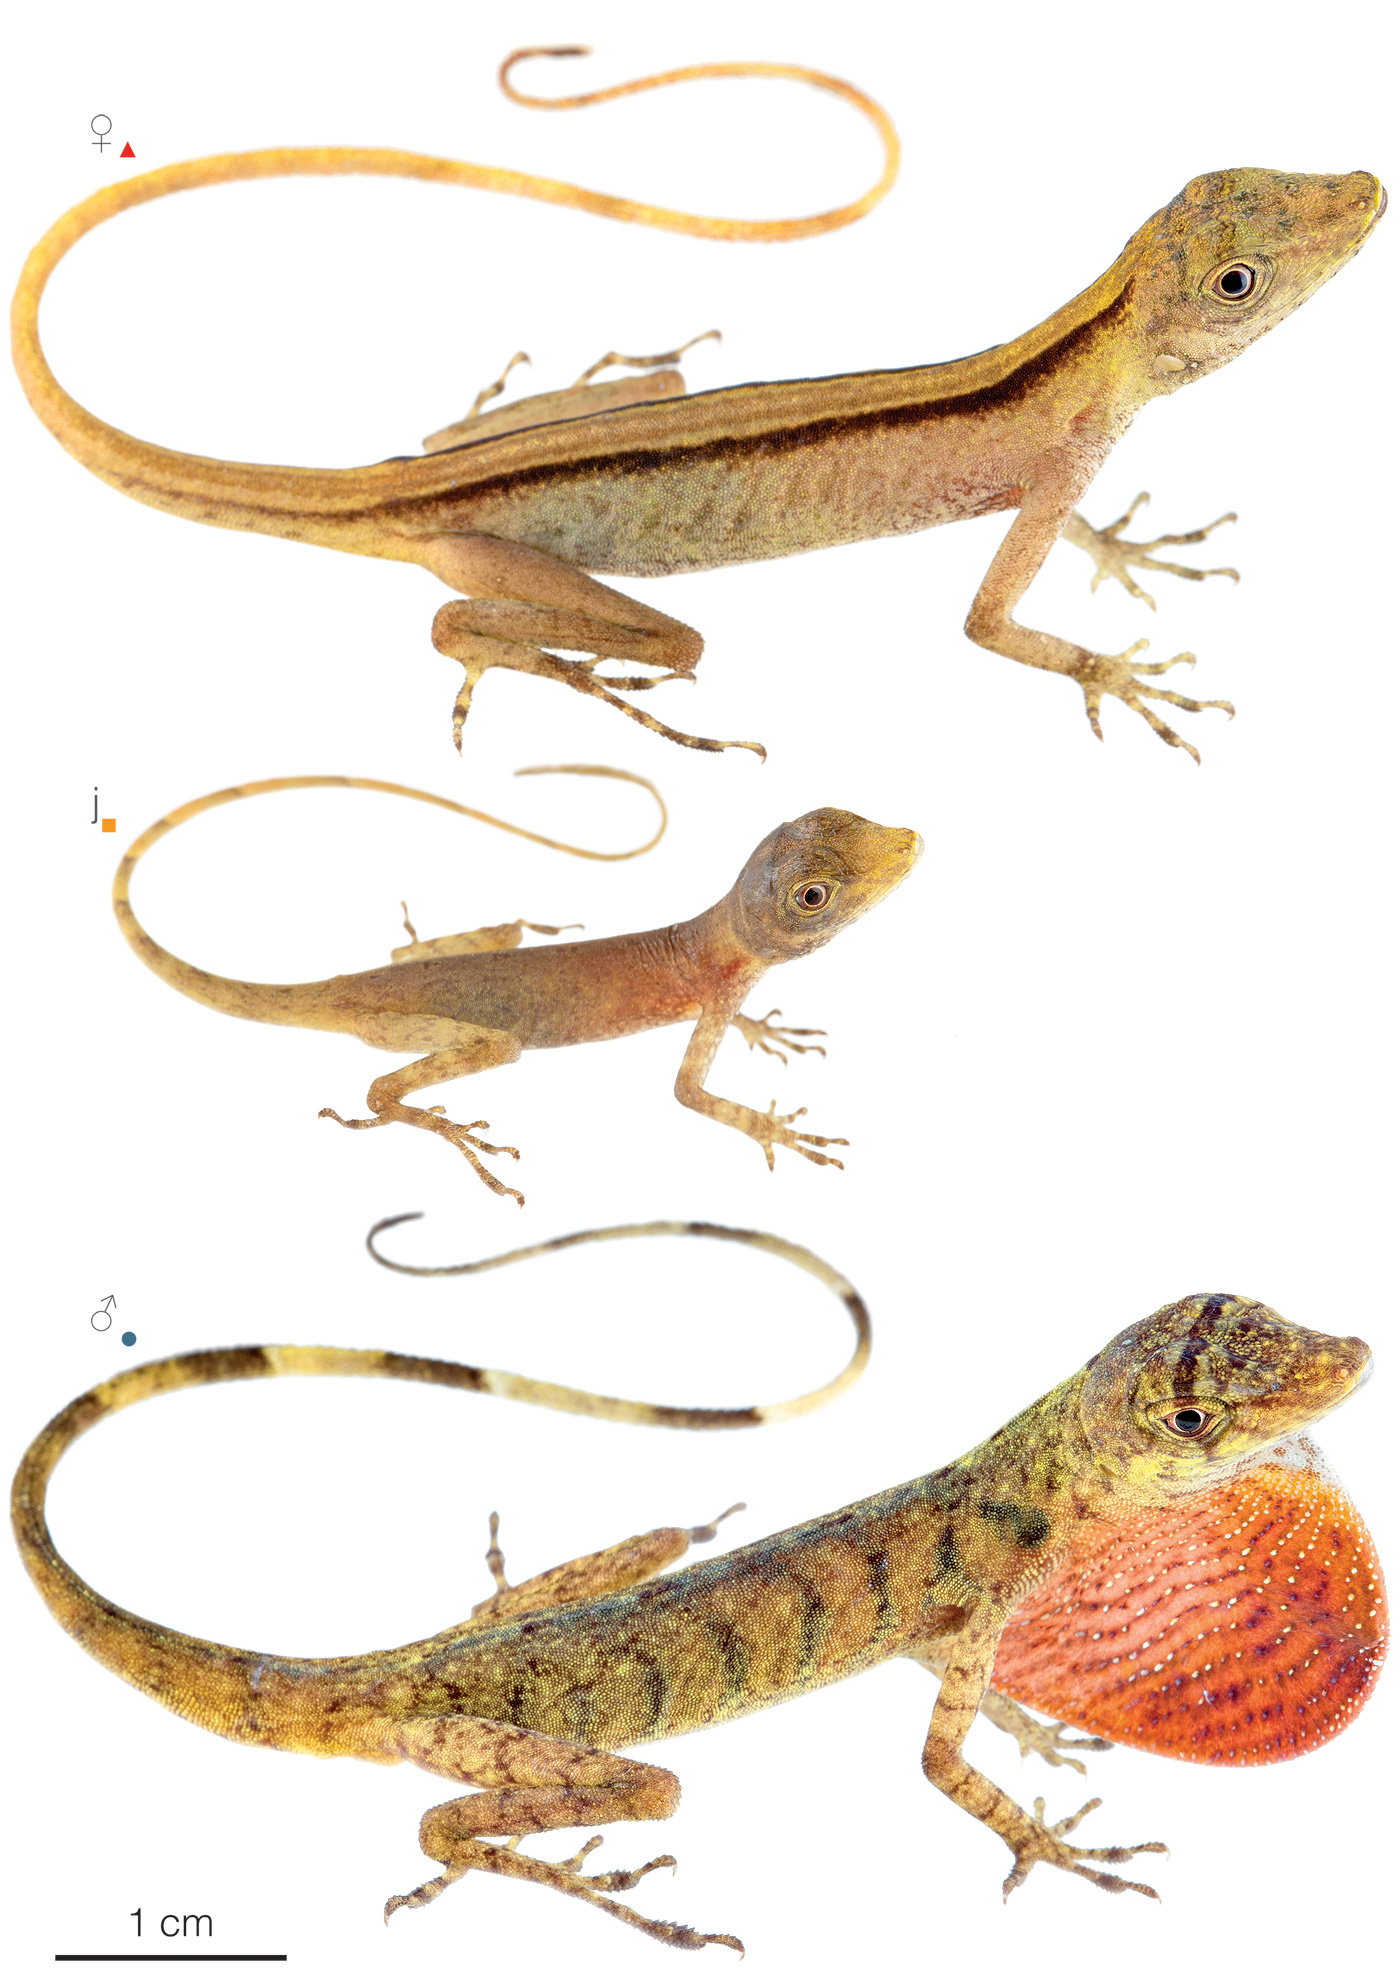 Figure showing variation among individuals of Anolis maculiventris